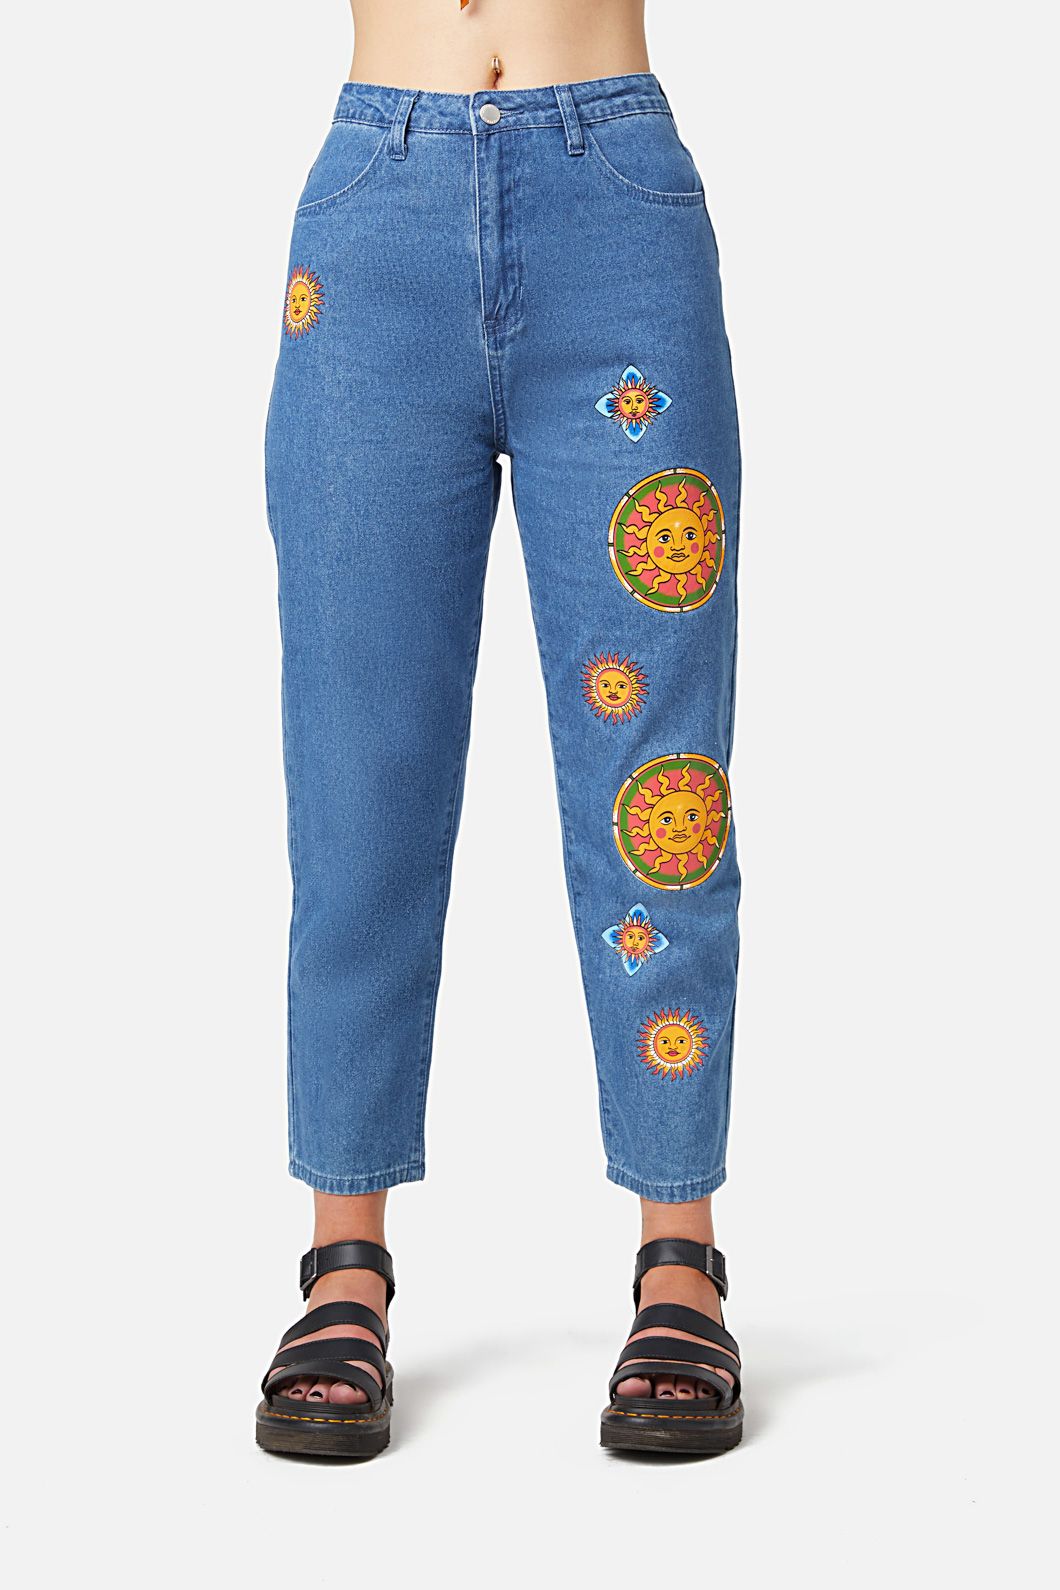 Moon Planet Stars Print Relaxed Jeans Womens Hippie Summer Loose Baggy Mom  Pants 